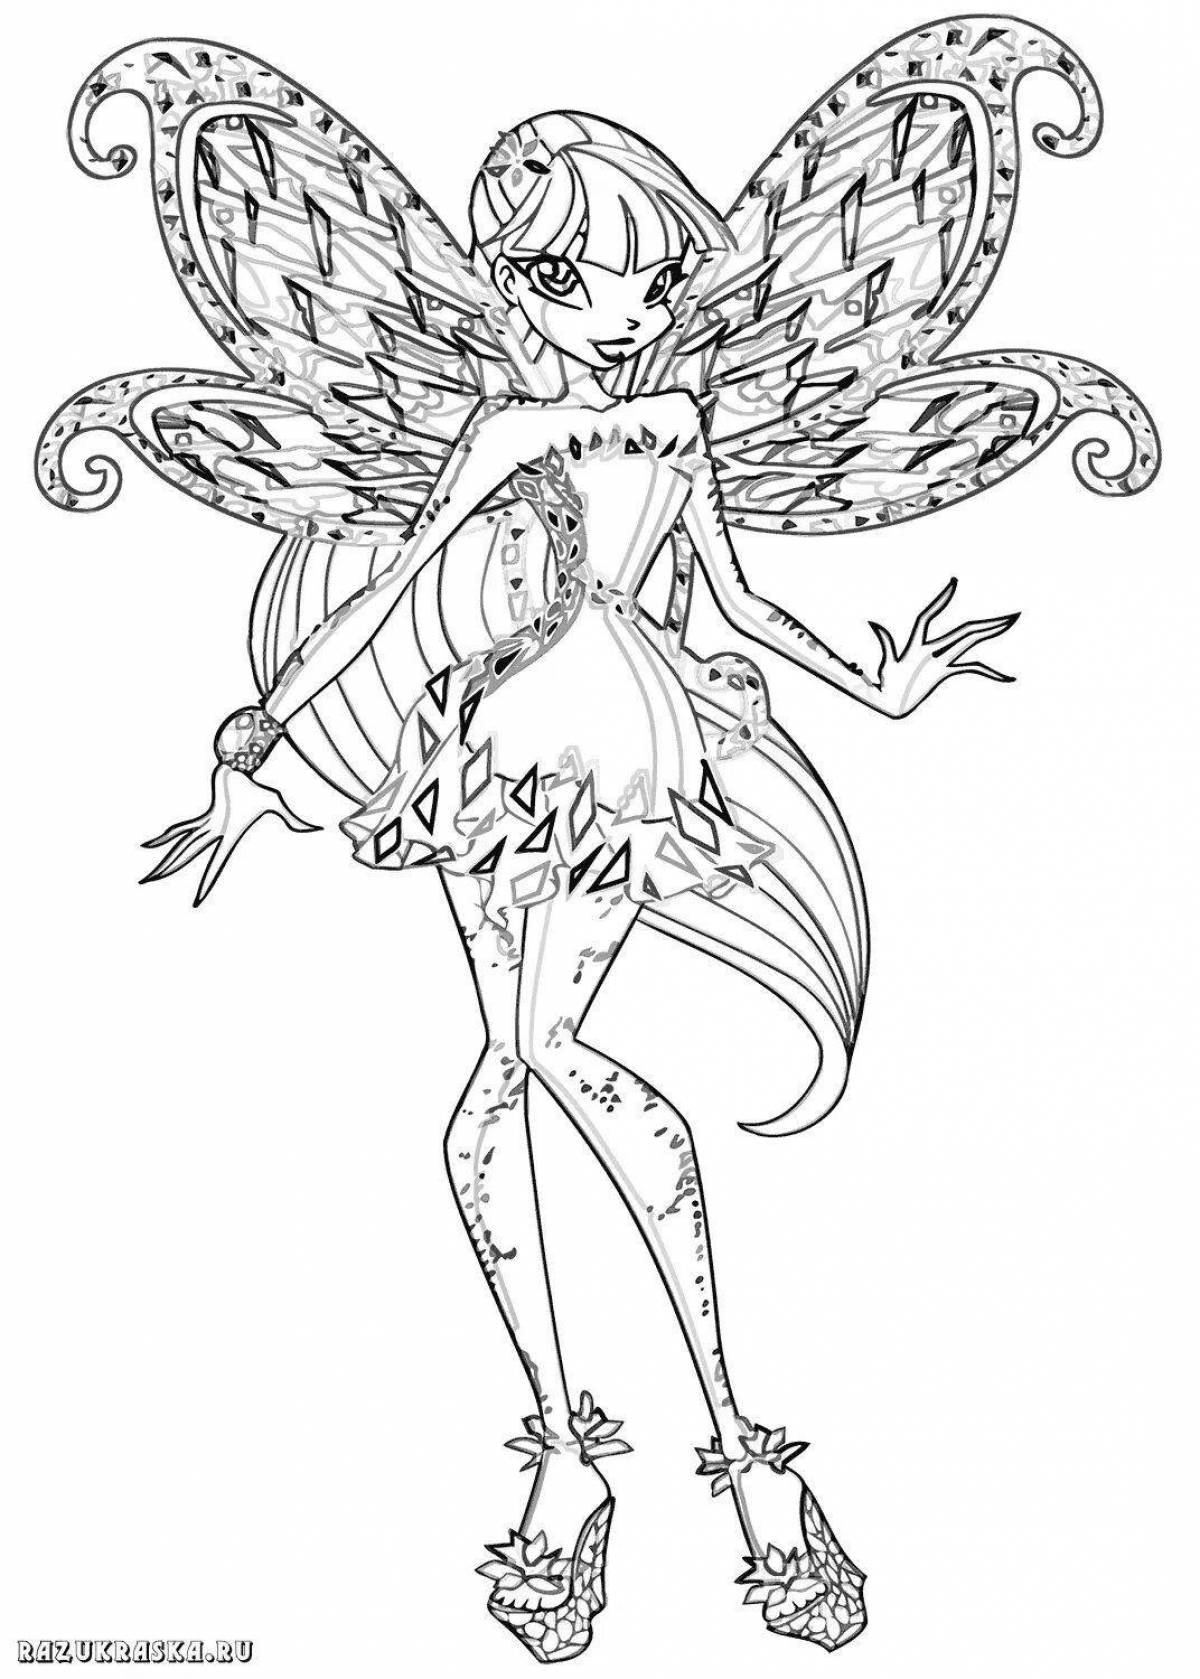 Charming tynix winx coloring page